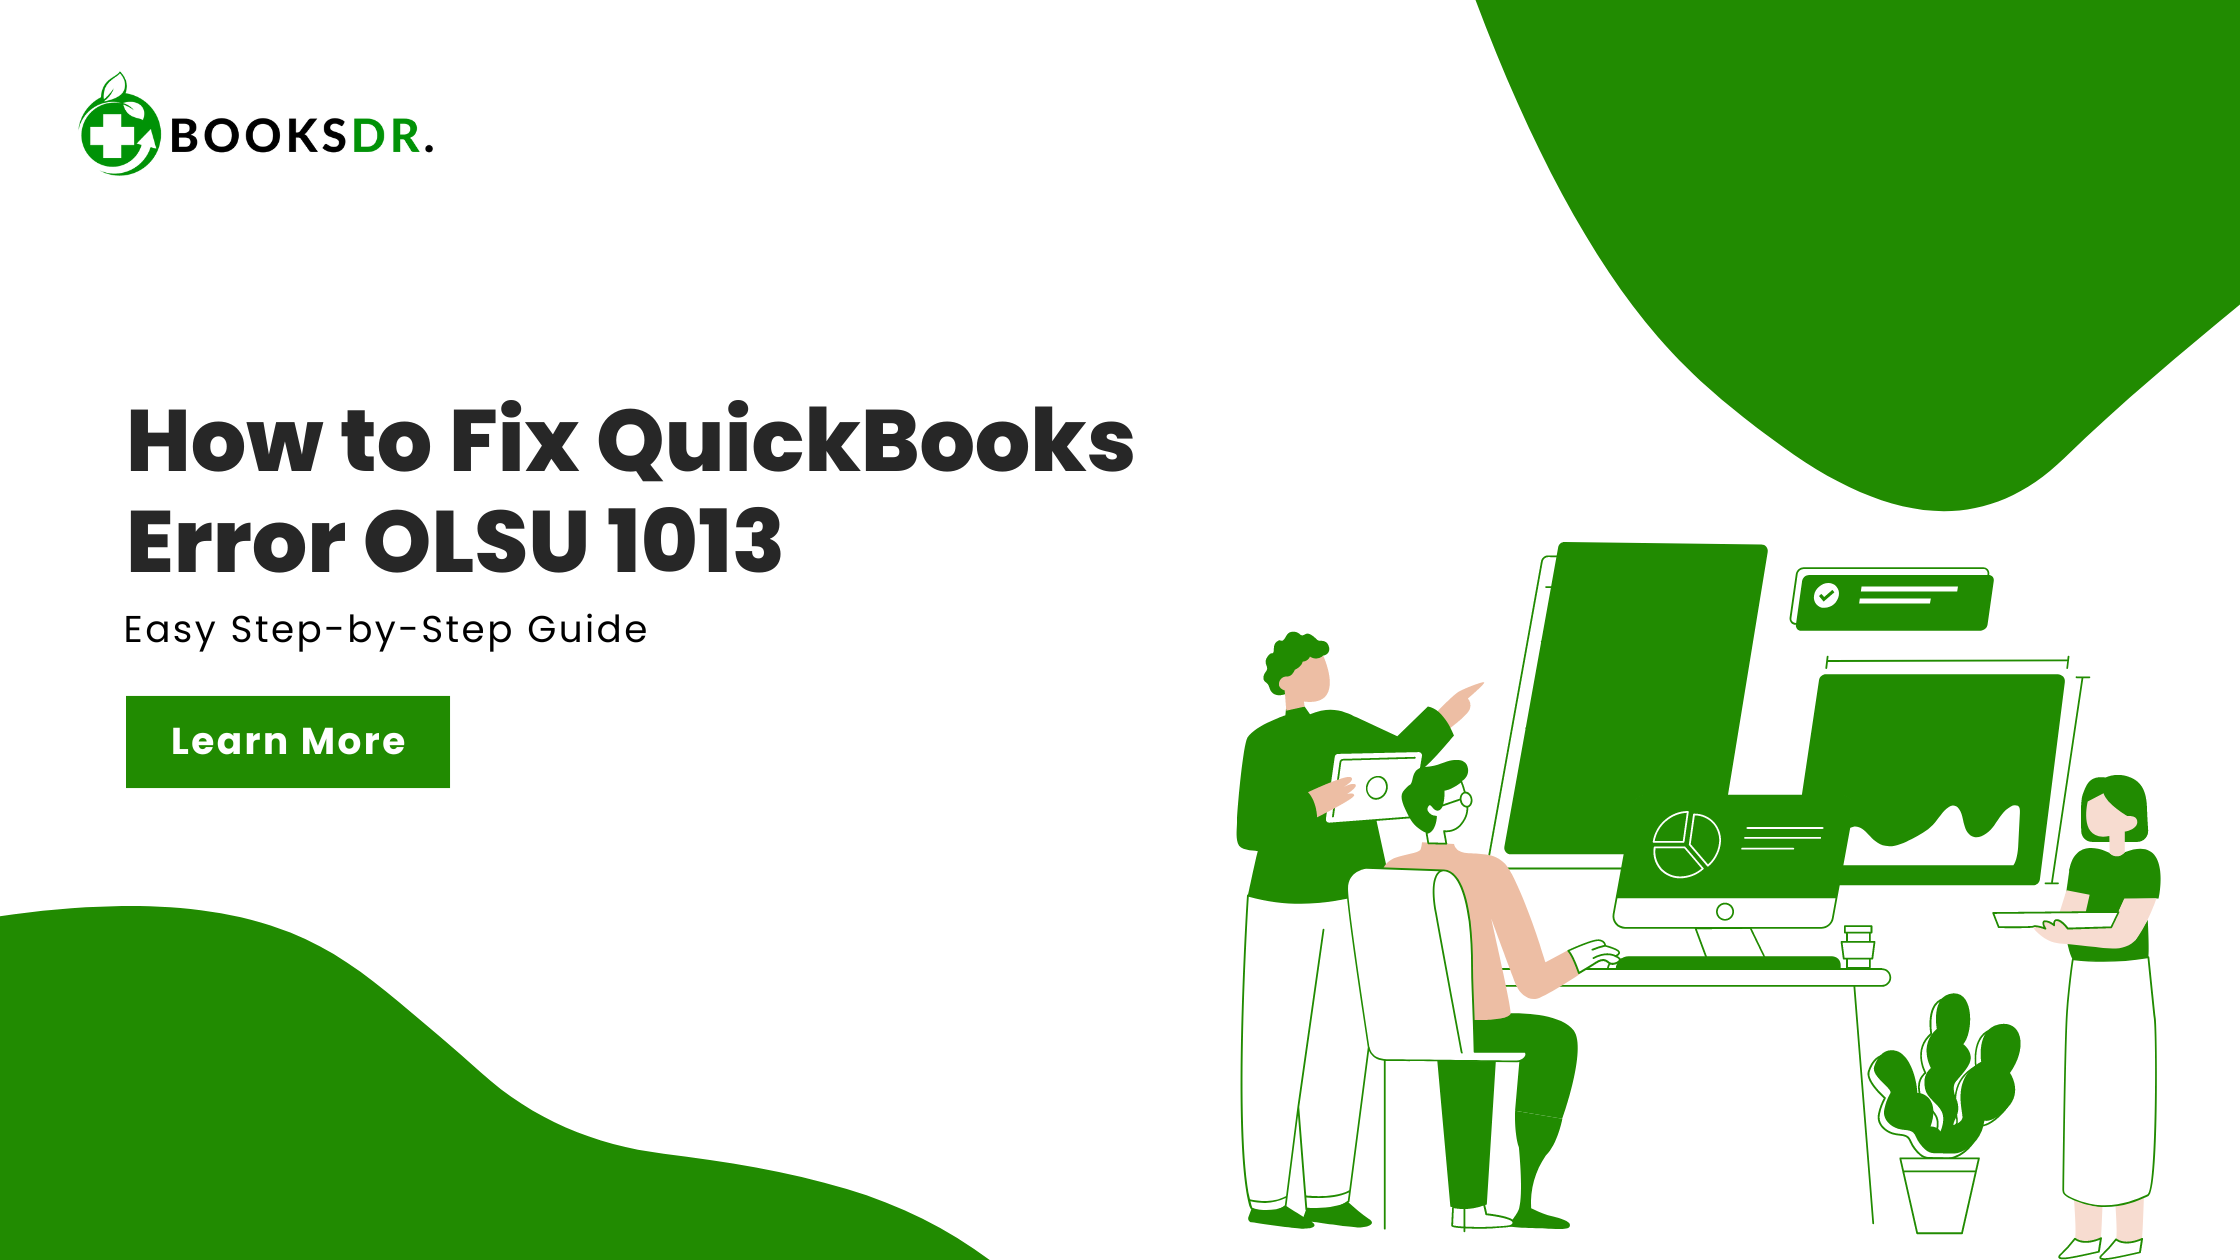 How to  Fix QuickBooks Error OLSU 1013: Easy Step-by-Step Guide